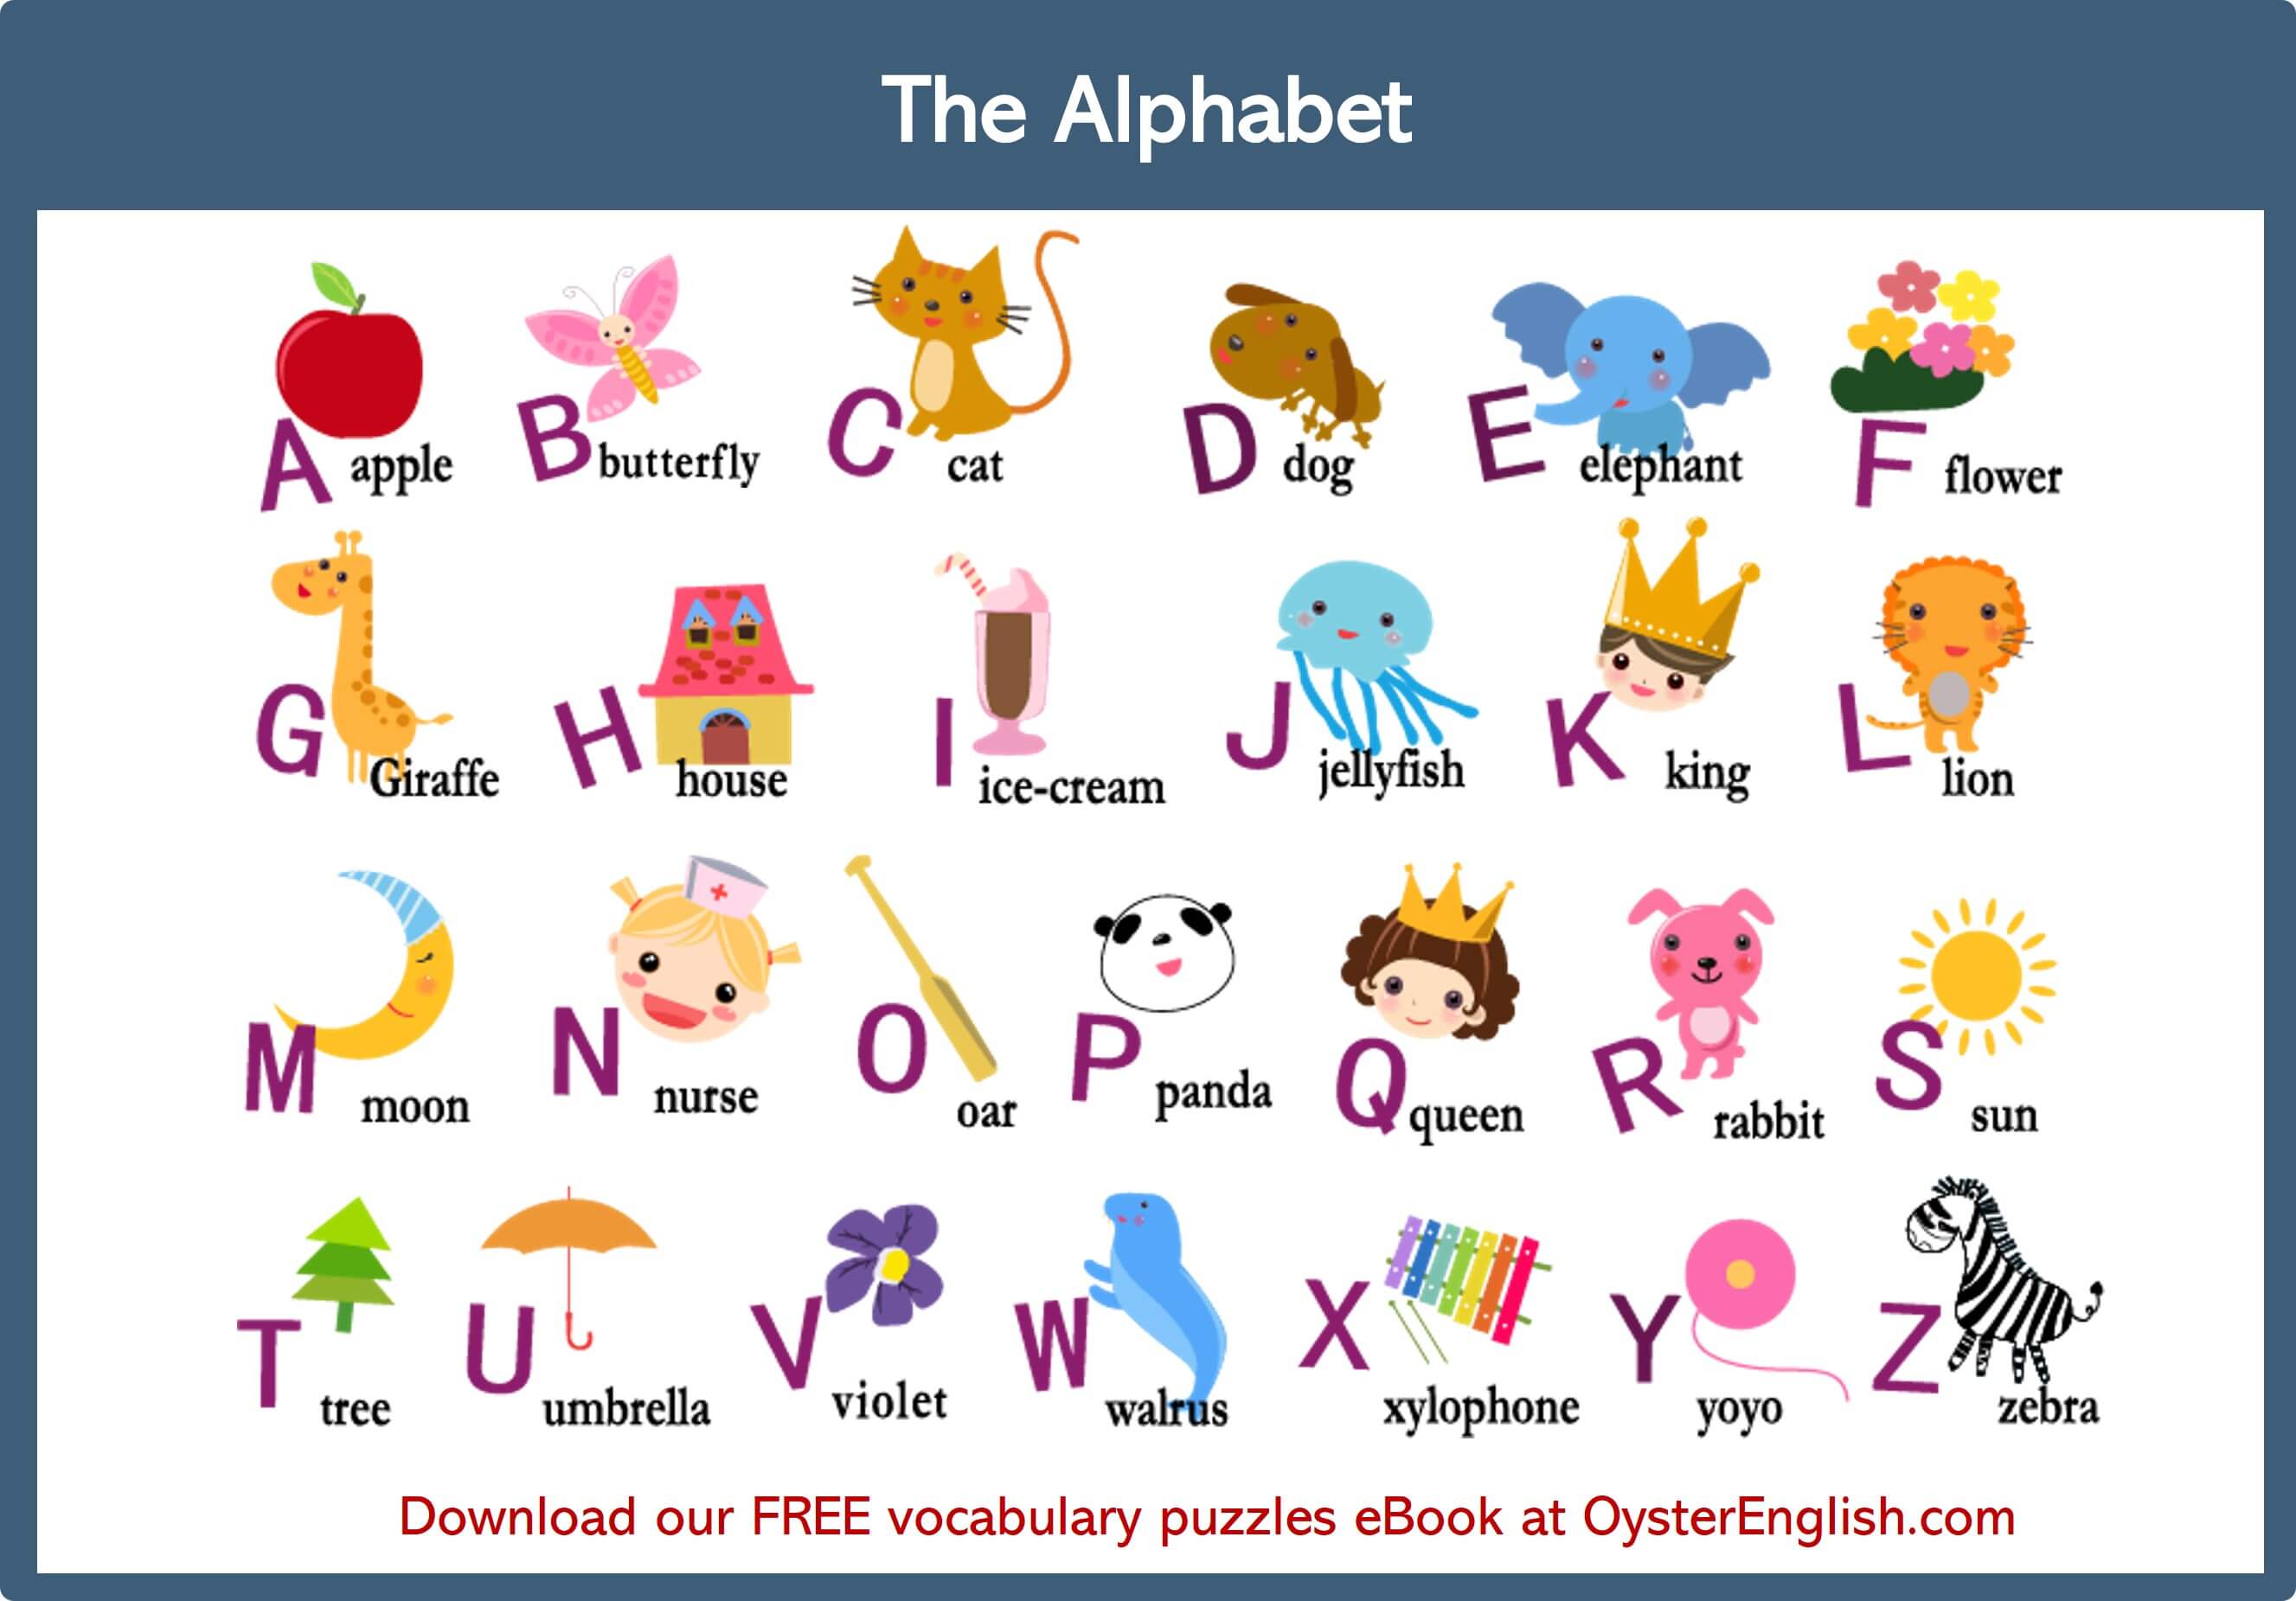 A visual of the English alphabet with pictures representing the letters of the alphabet